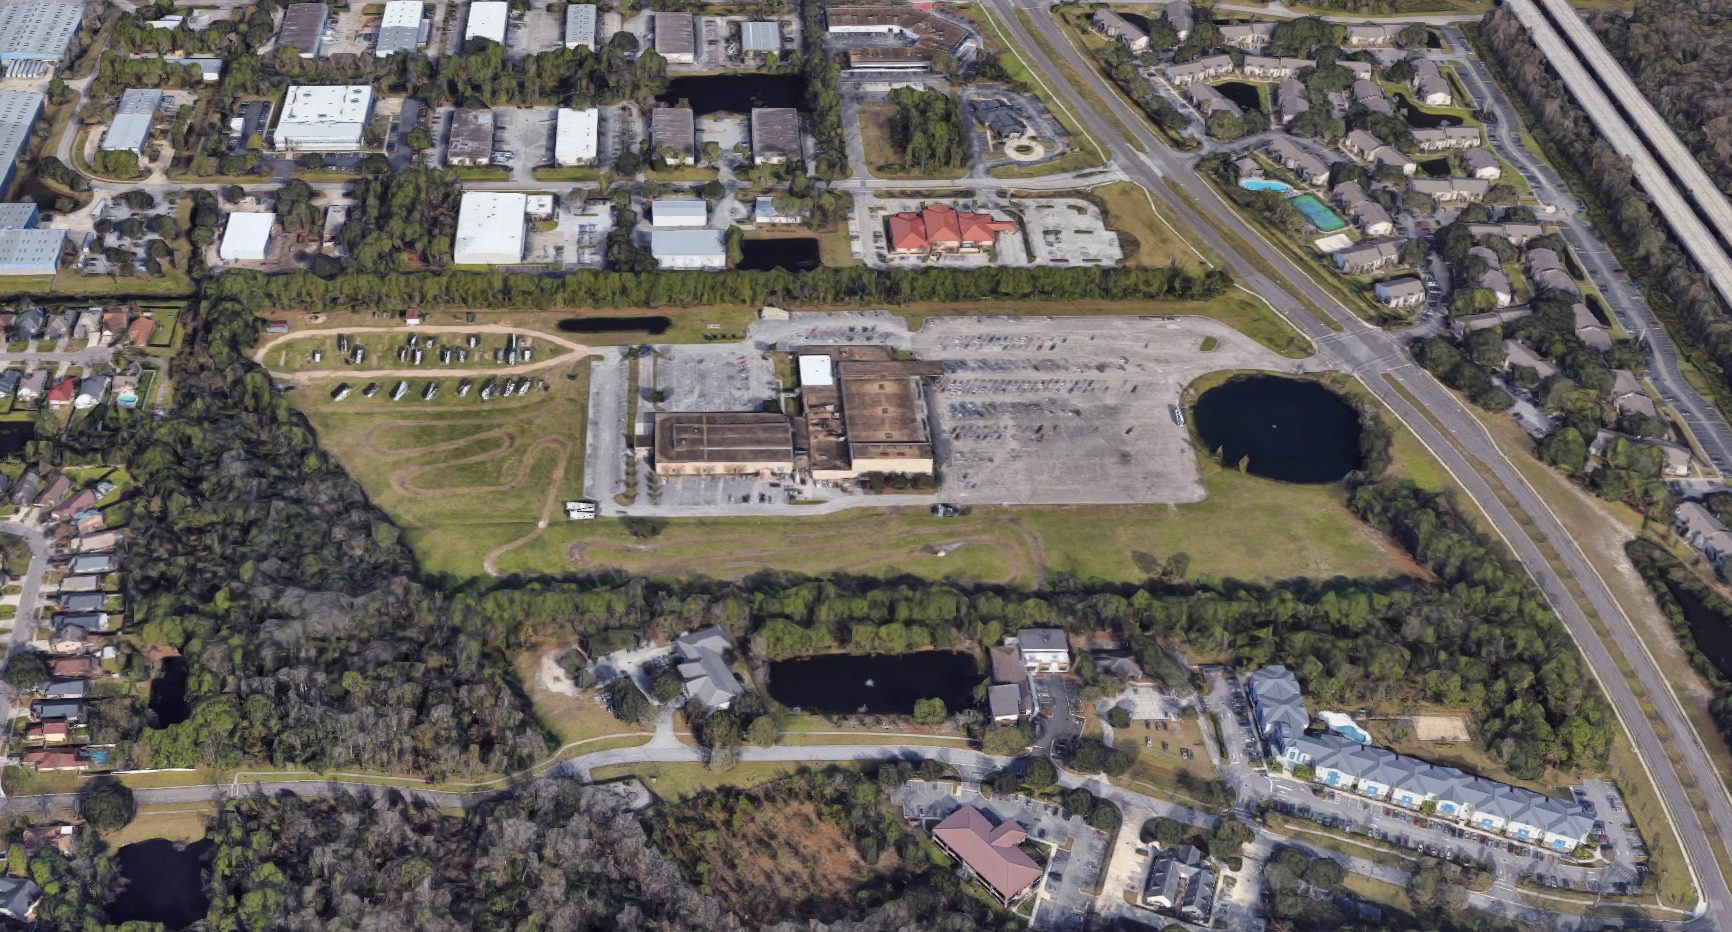 The property comprises 37 acres at 3800 St. Johns Bluff Road S.